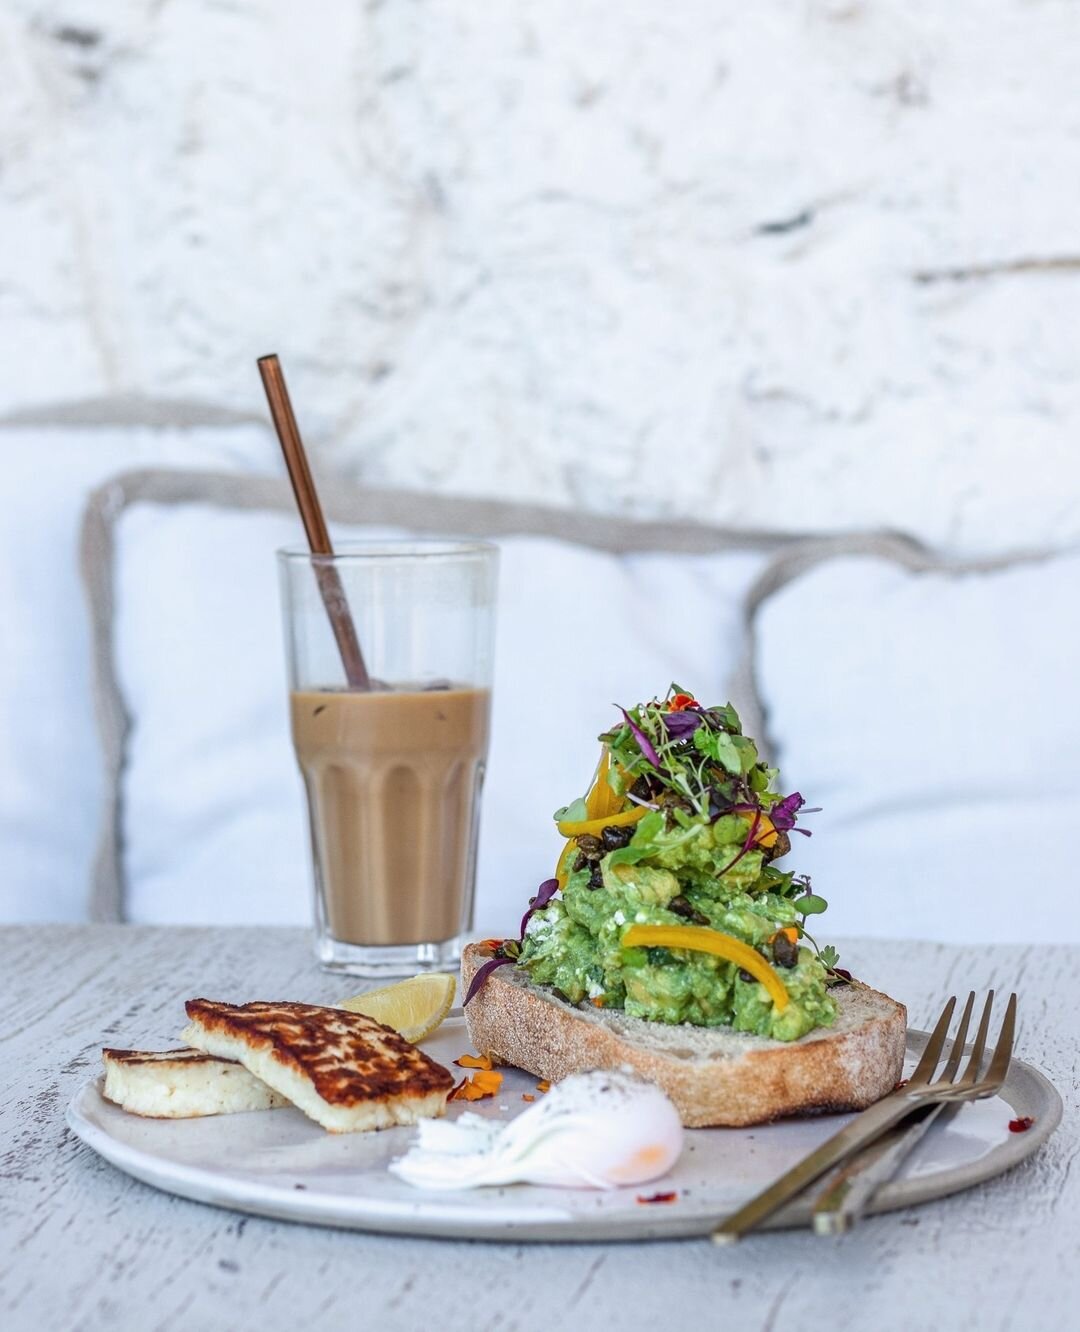  The Milkman’s Daughter Gold Coast. This guide to the best cafes in Gold Coast Australia includes the best breakfast spots in Gold Coast and the best vegan cafes in Gold Coast. Find the best cafes in Burleigh Head, Palm Beach, and more of the best pl